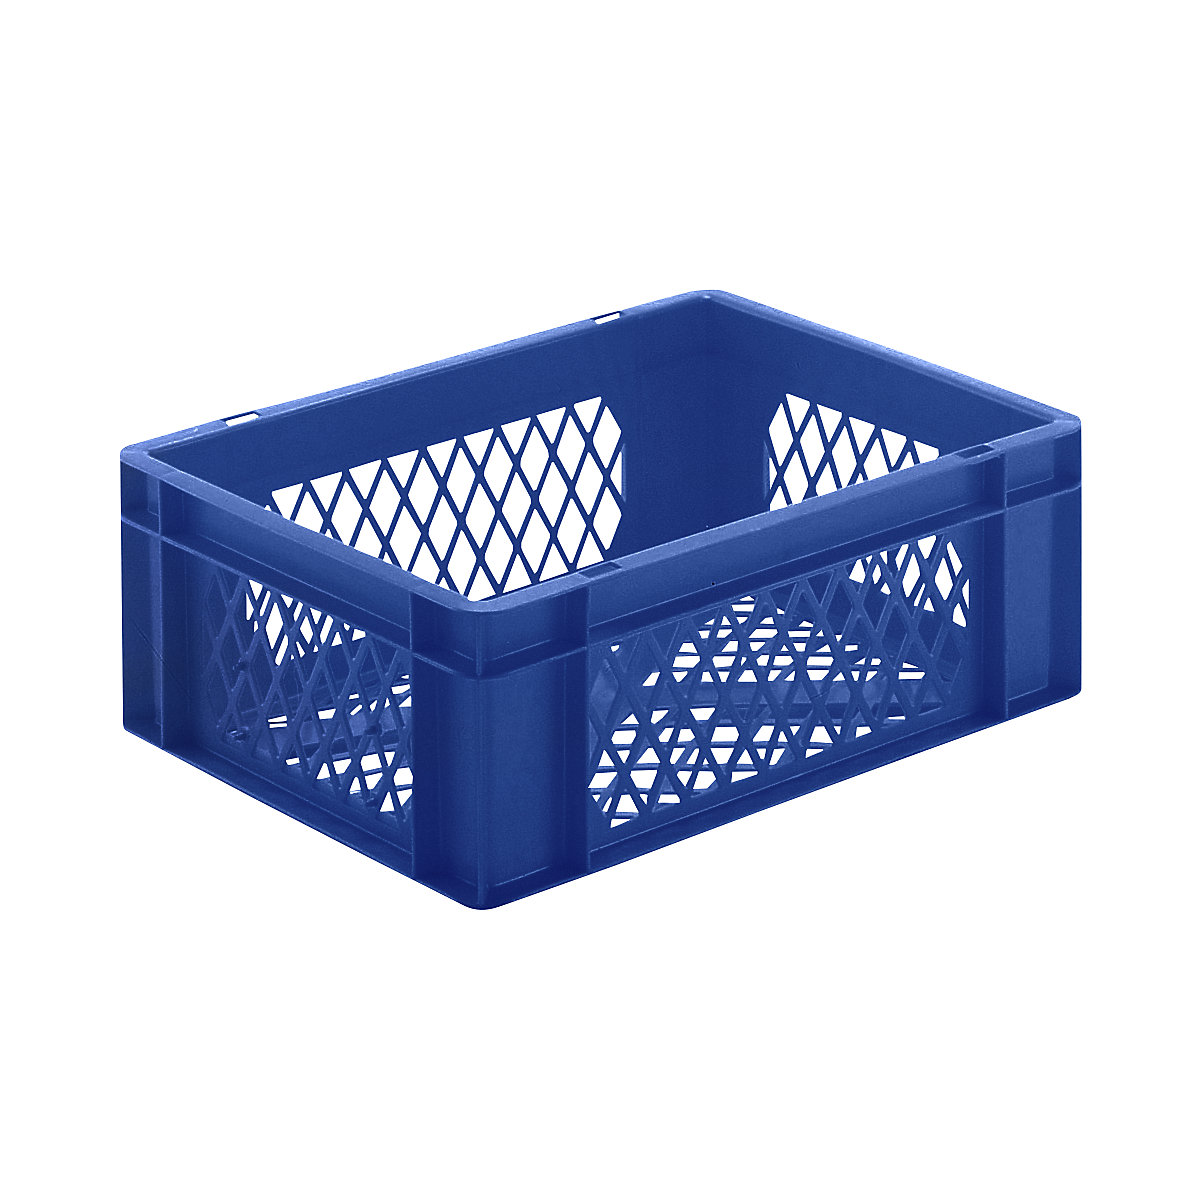 Euro stacking container, perforated walls and base, LxWxH 400 x 300 x 145 mm, blue, pack of 5-7